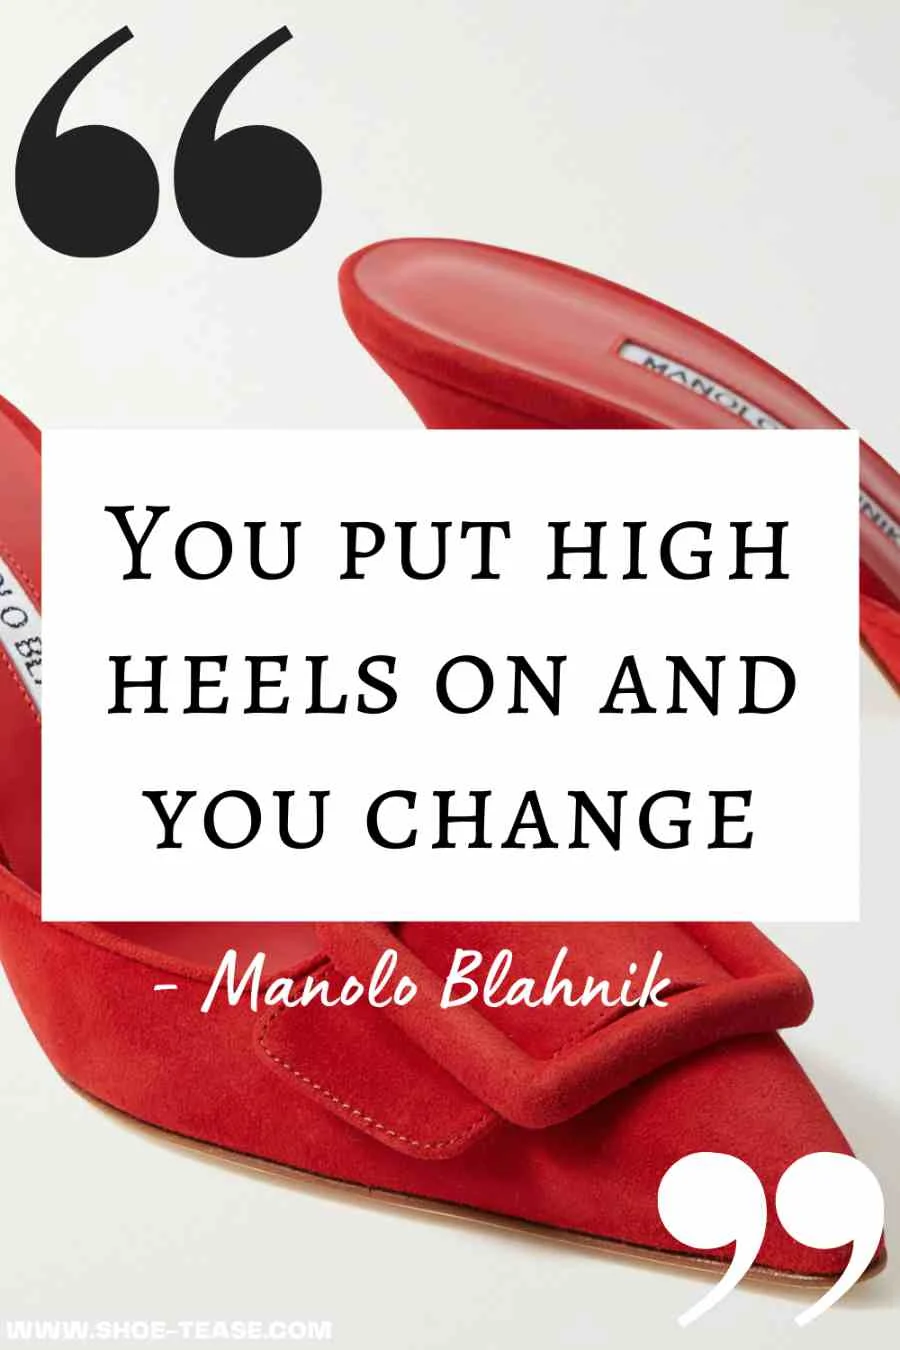 Black high heels quote text in box " You put high heels on and you change - Manolo Blahnik" over image of red suede Manolo heeled slides.